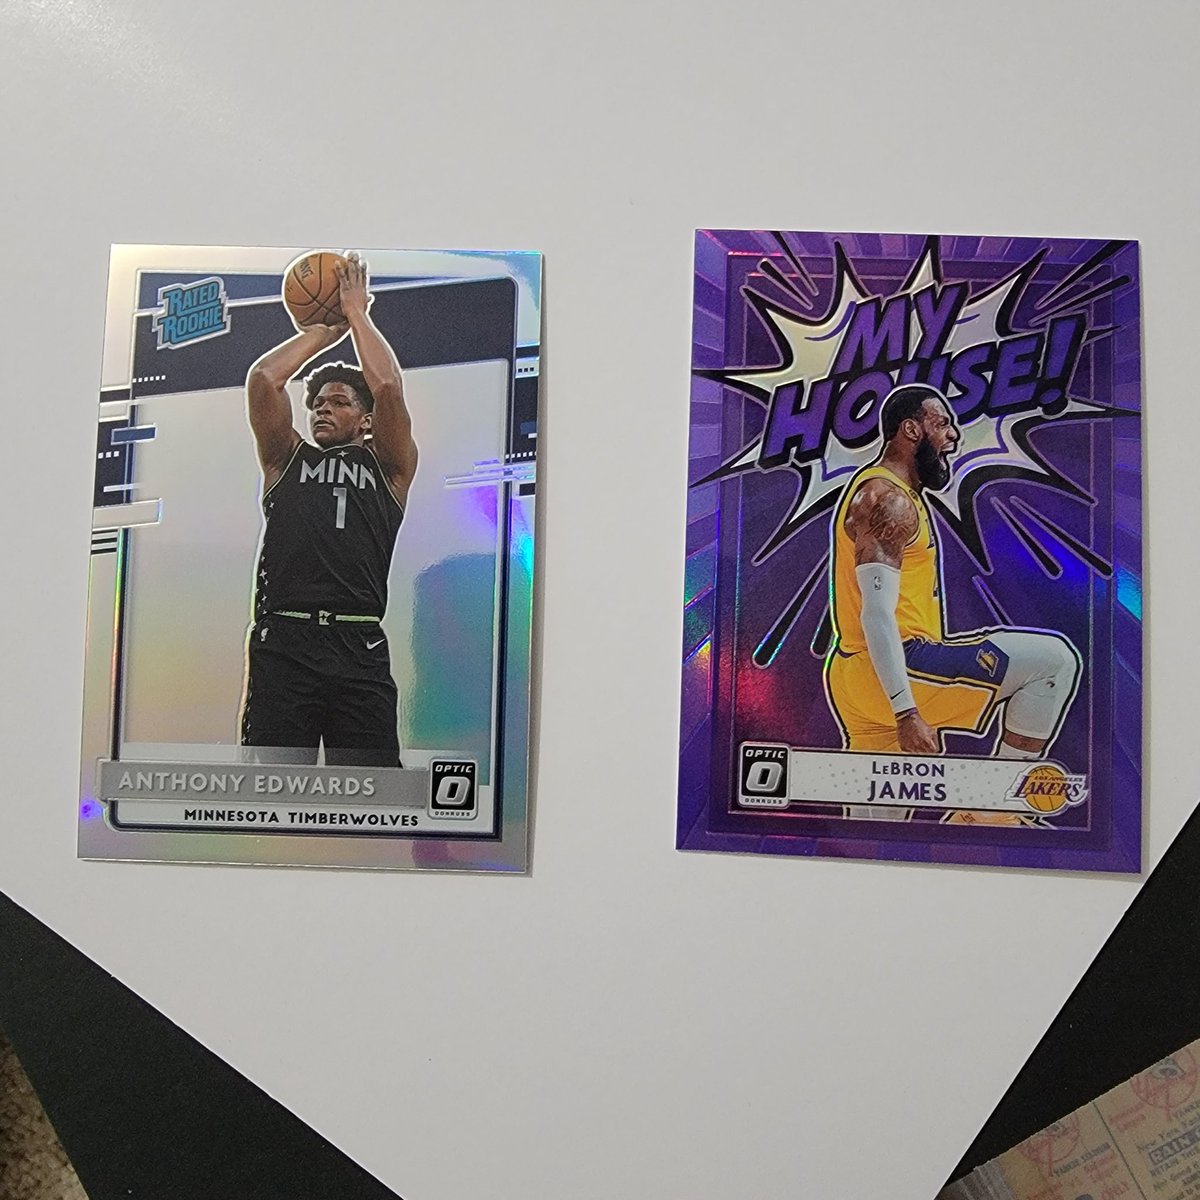 Bought a blaster box of 2020-21 @PaniniAmerica Optic Basketball at  Syracuse Collectorfest today.  2 pretty nice pulls. https://t.co/xPItXyeuuv